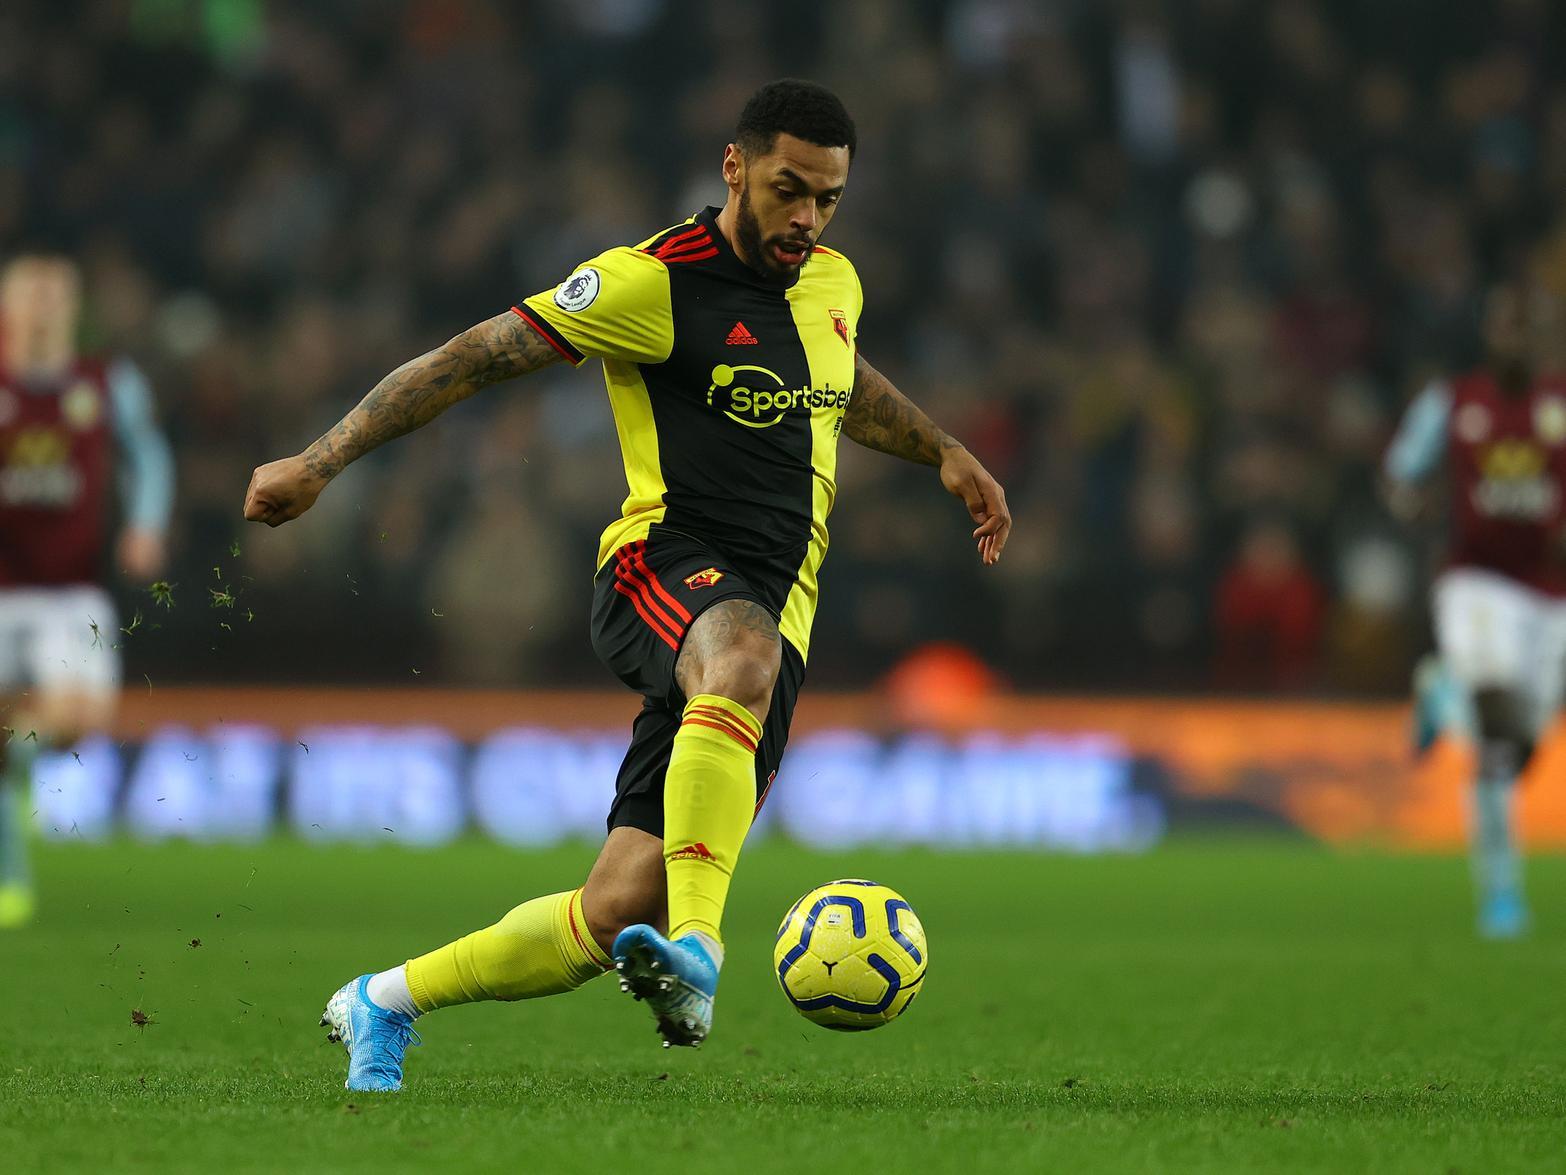 The bookies are backing Leeds United to secure a move for Watford forward Andre Gray, with the Whites currently 1/3, odds on favourites to land the striker